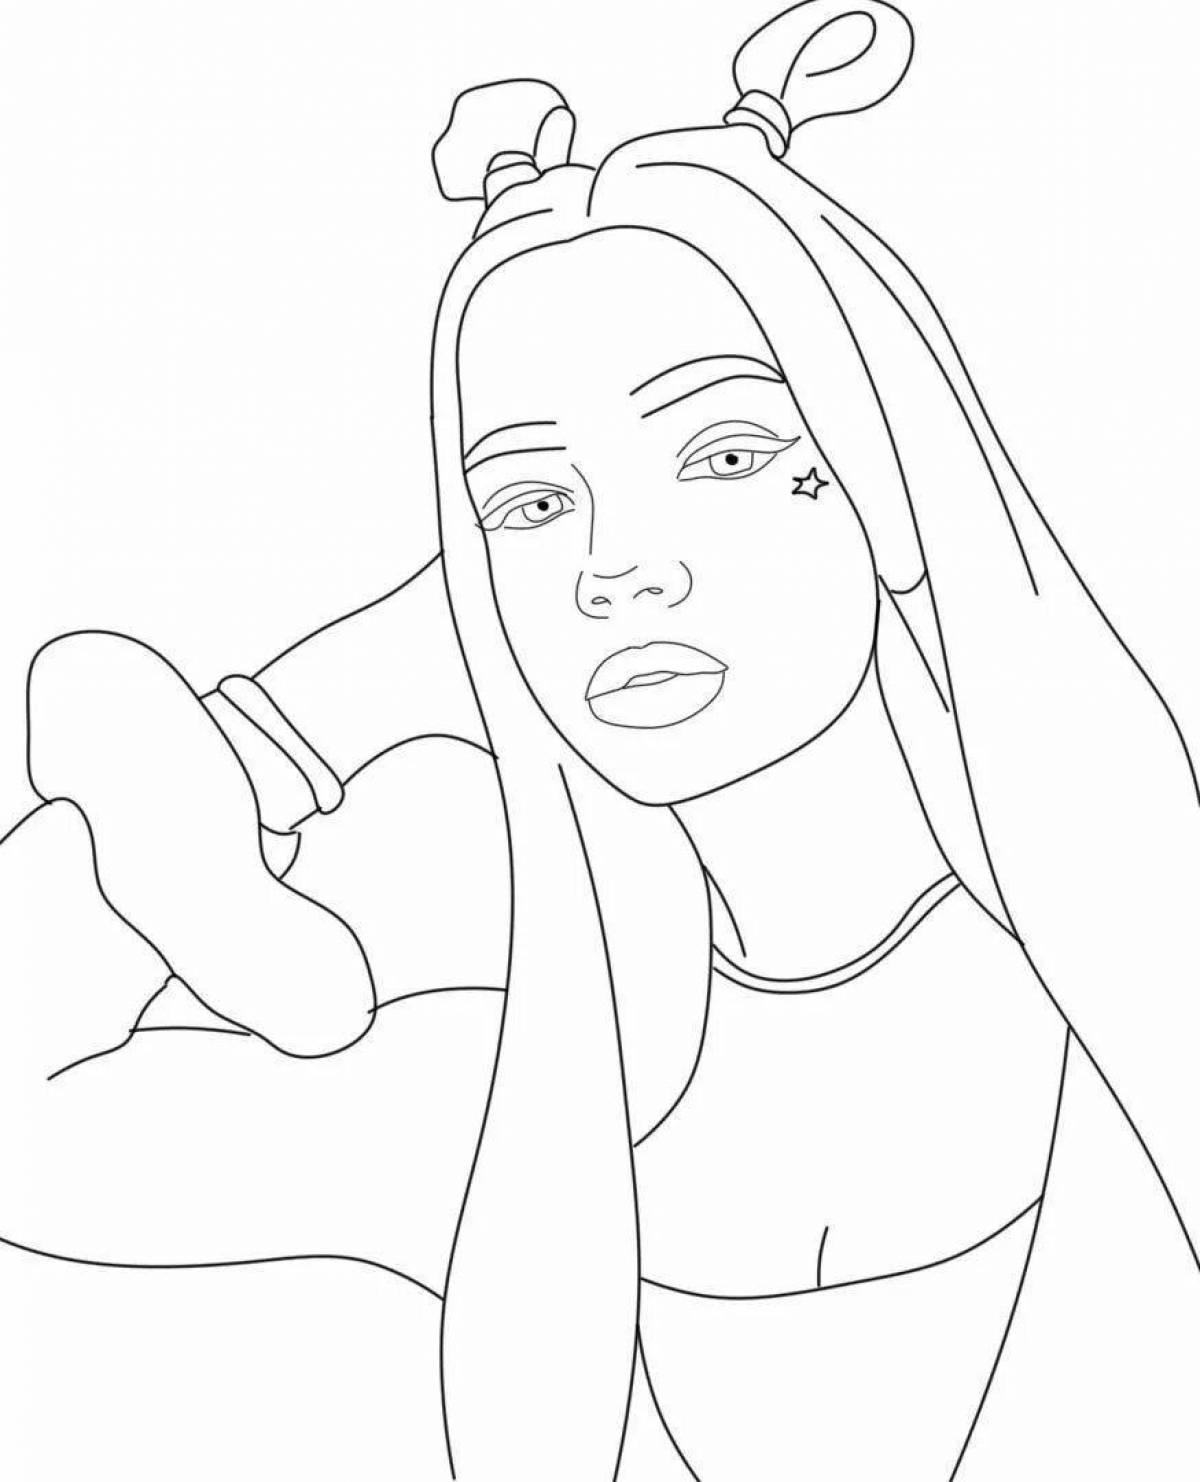 Dynamic valley carnival coloring page